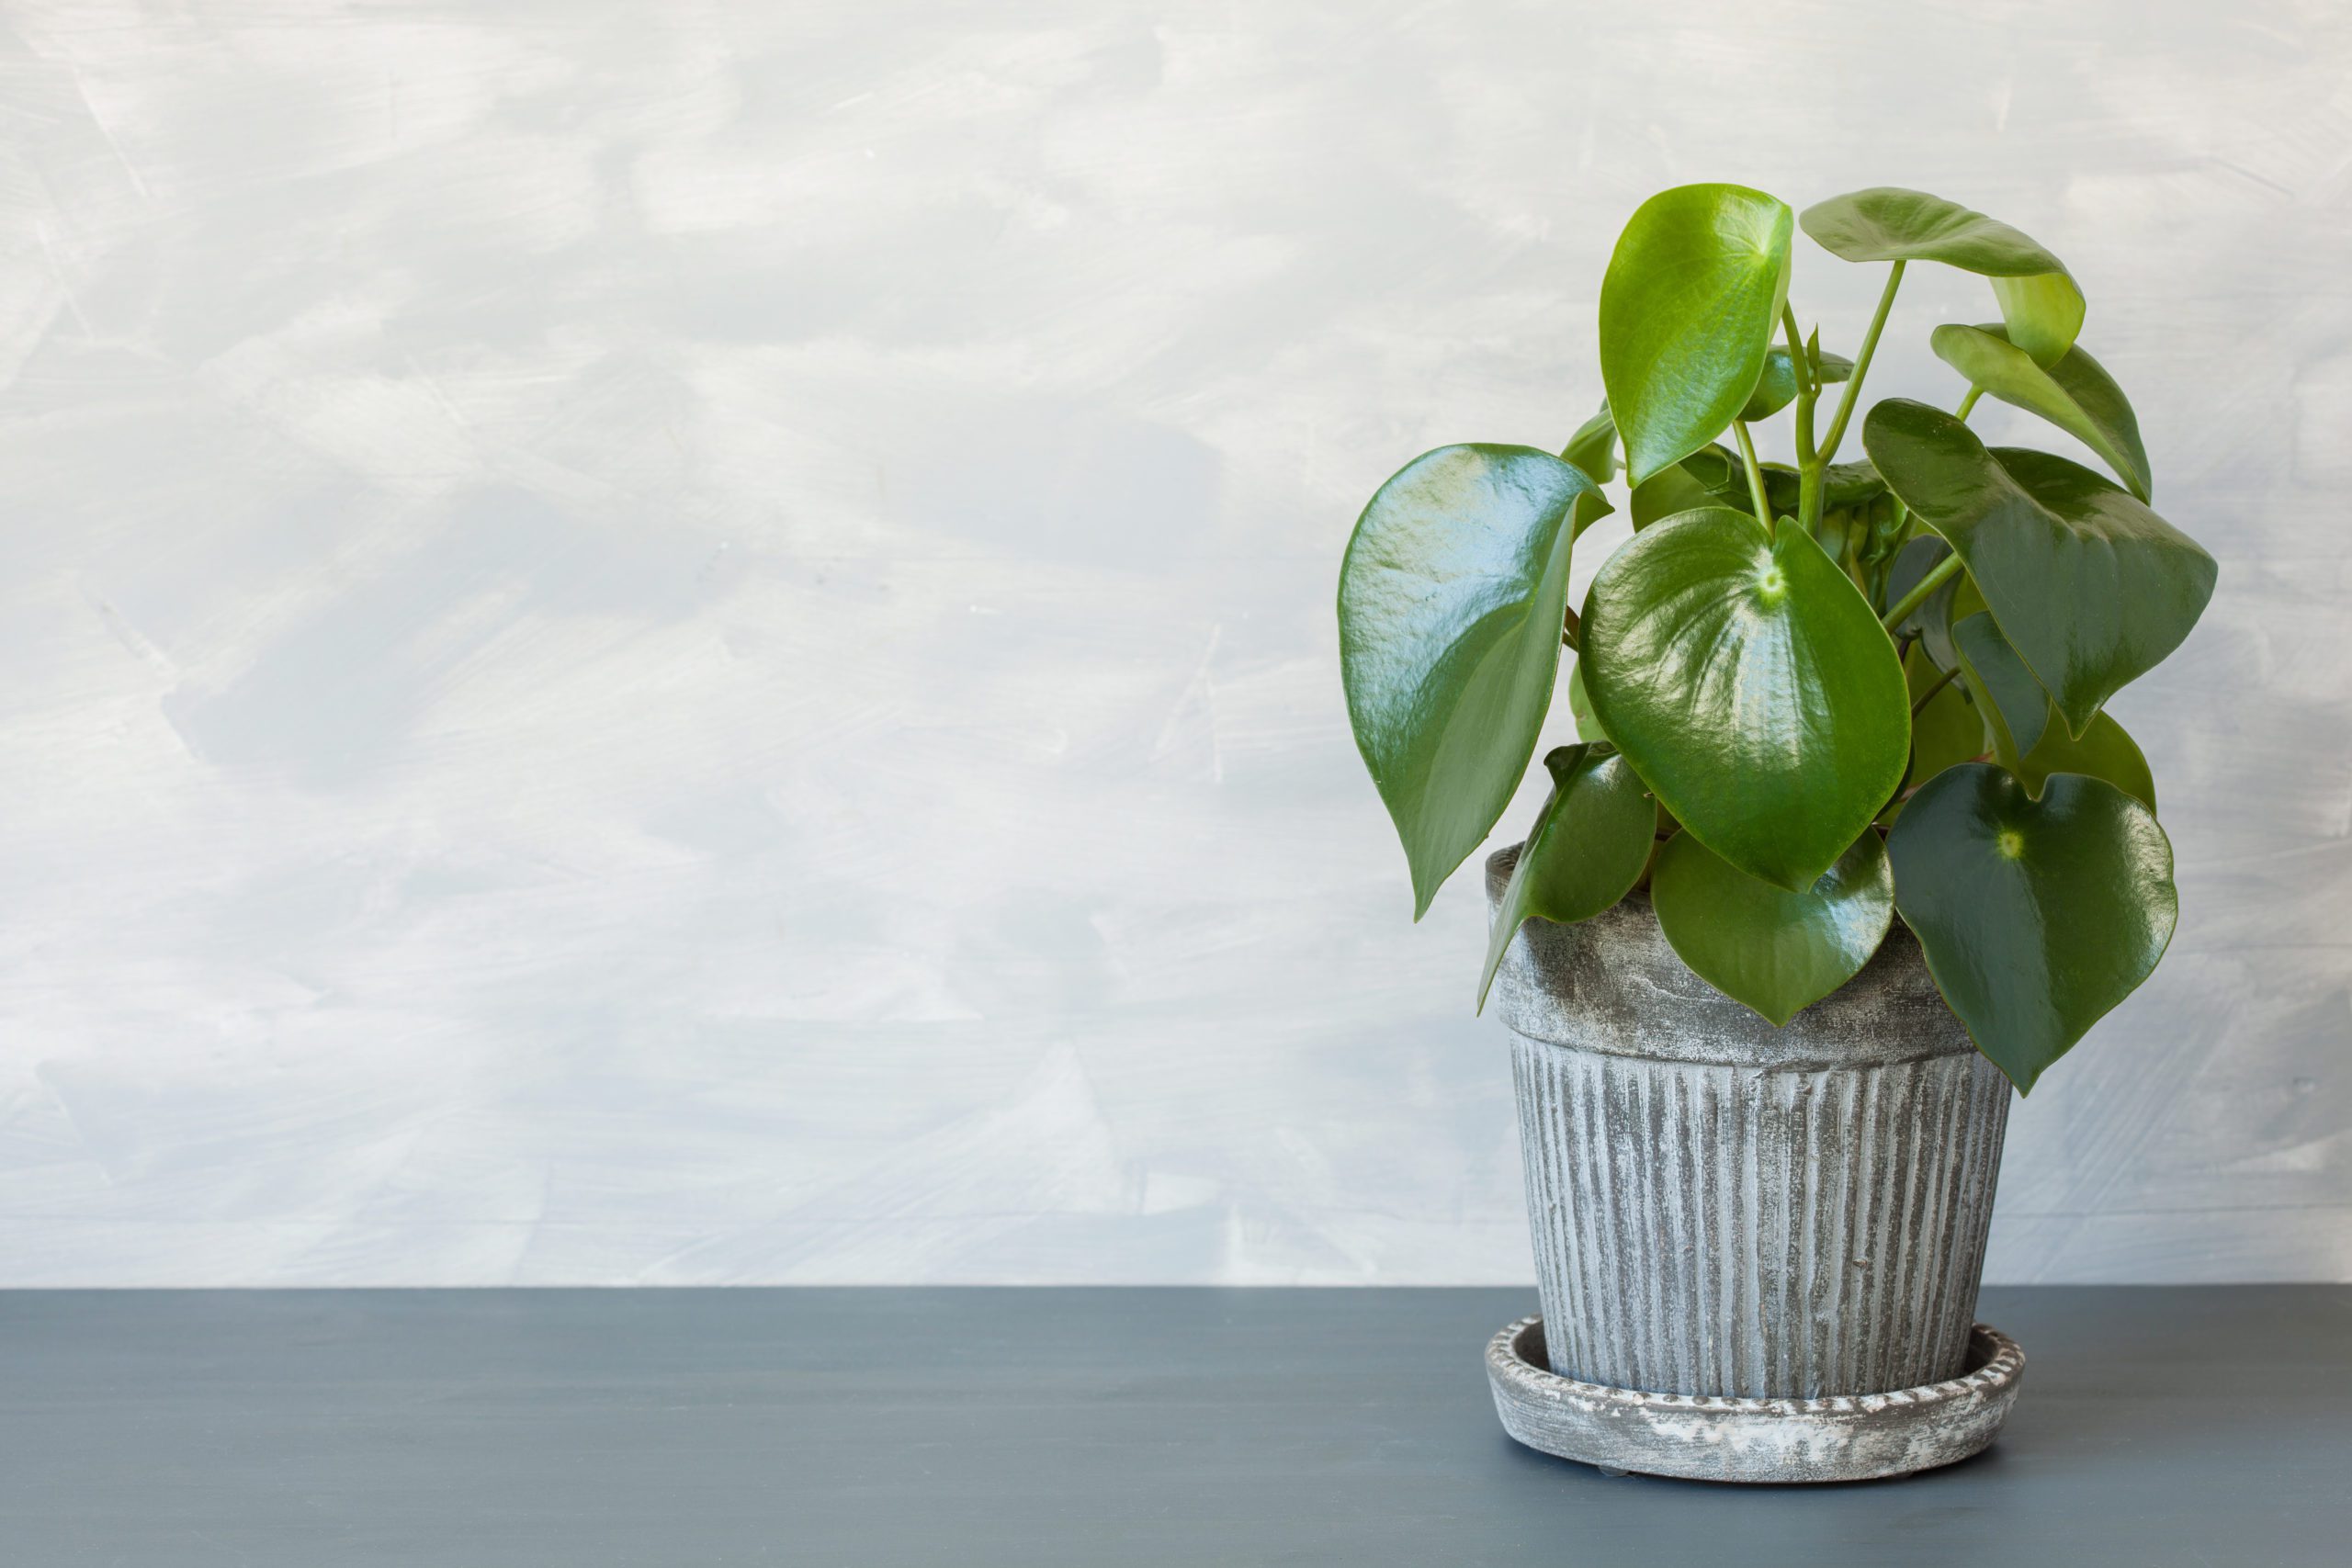 How to Care for Peperomia Plants